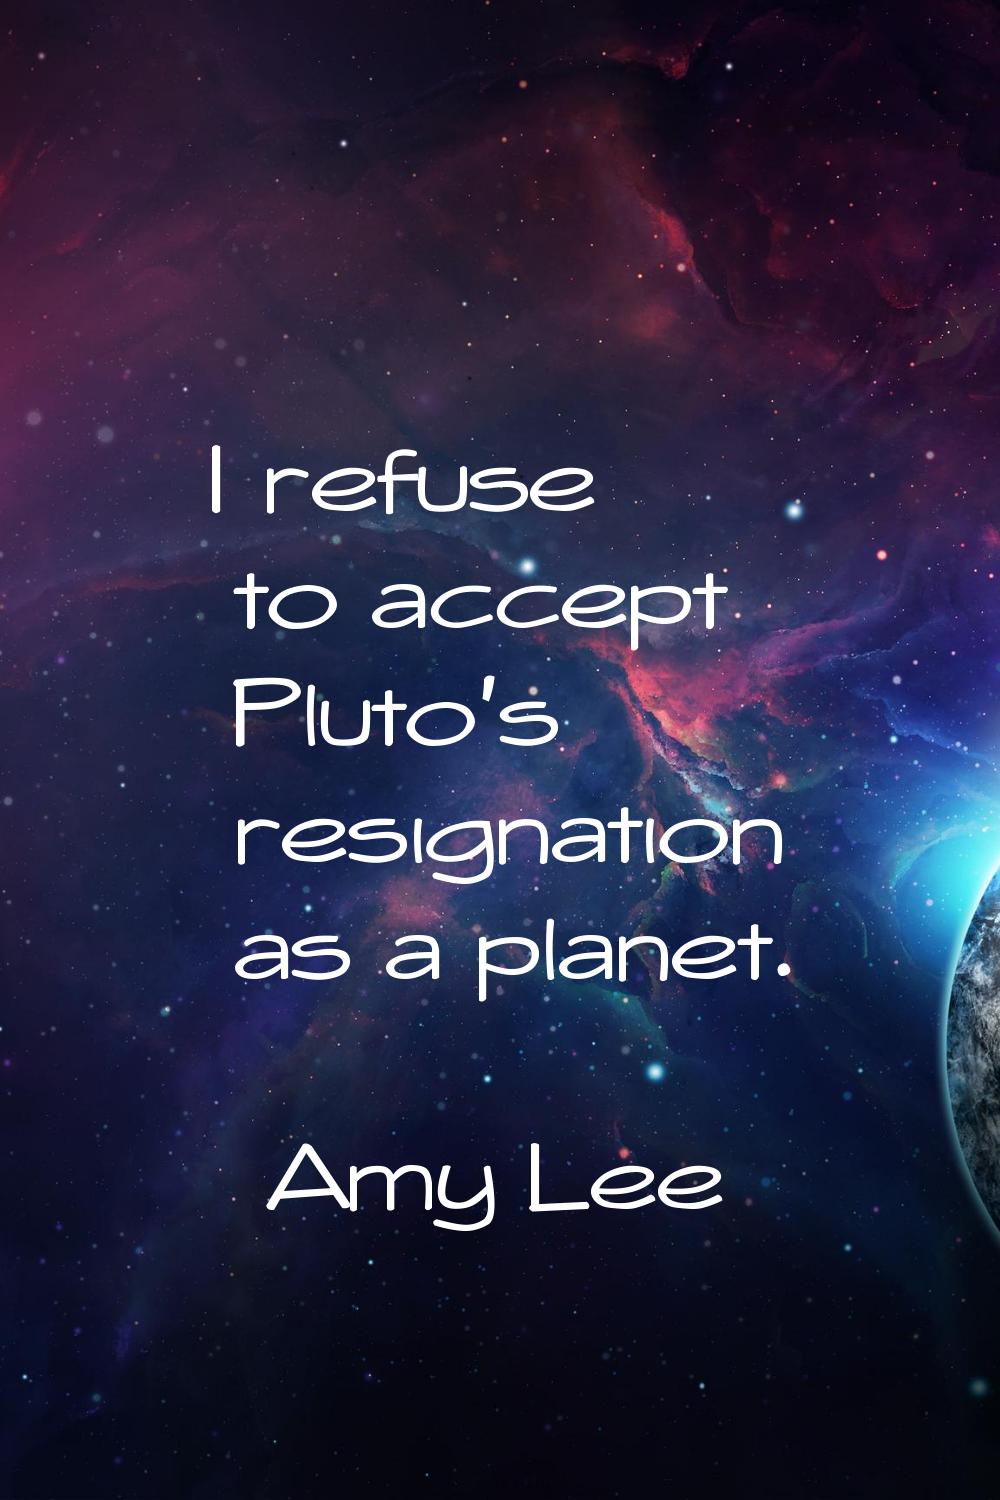 I refuse to accept Pluto's resignation as a planet.